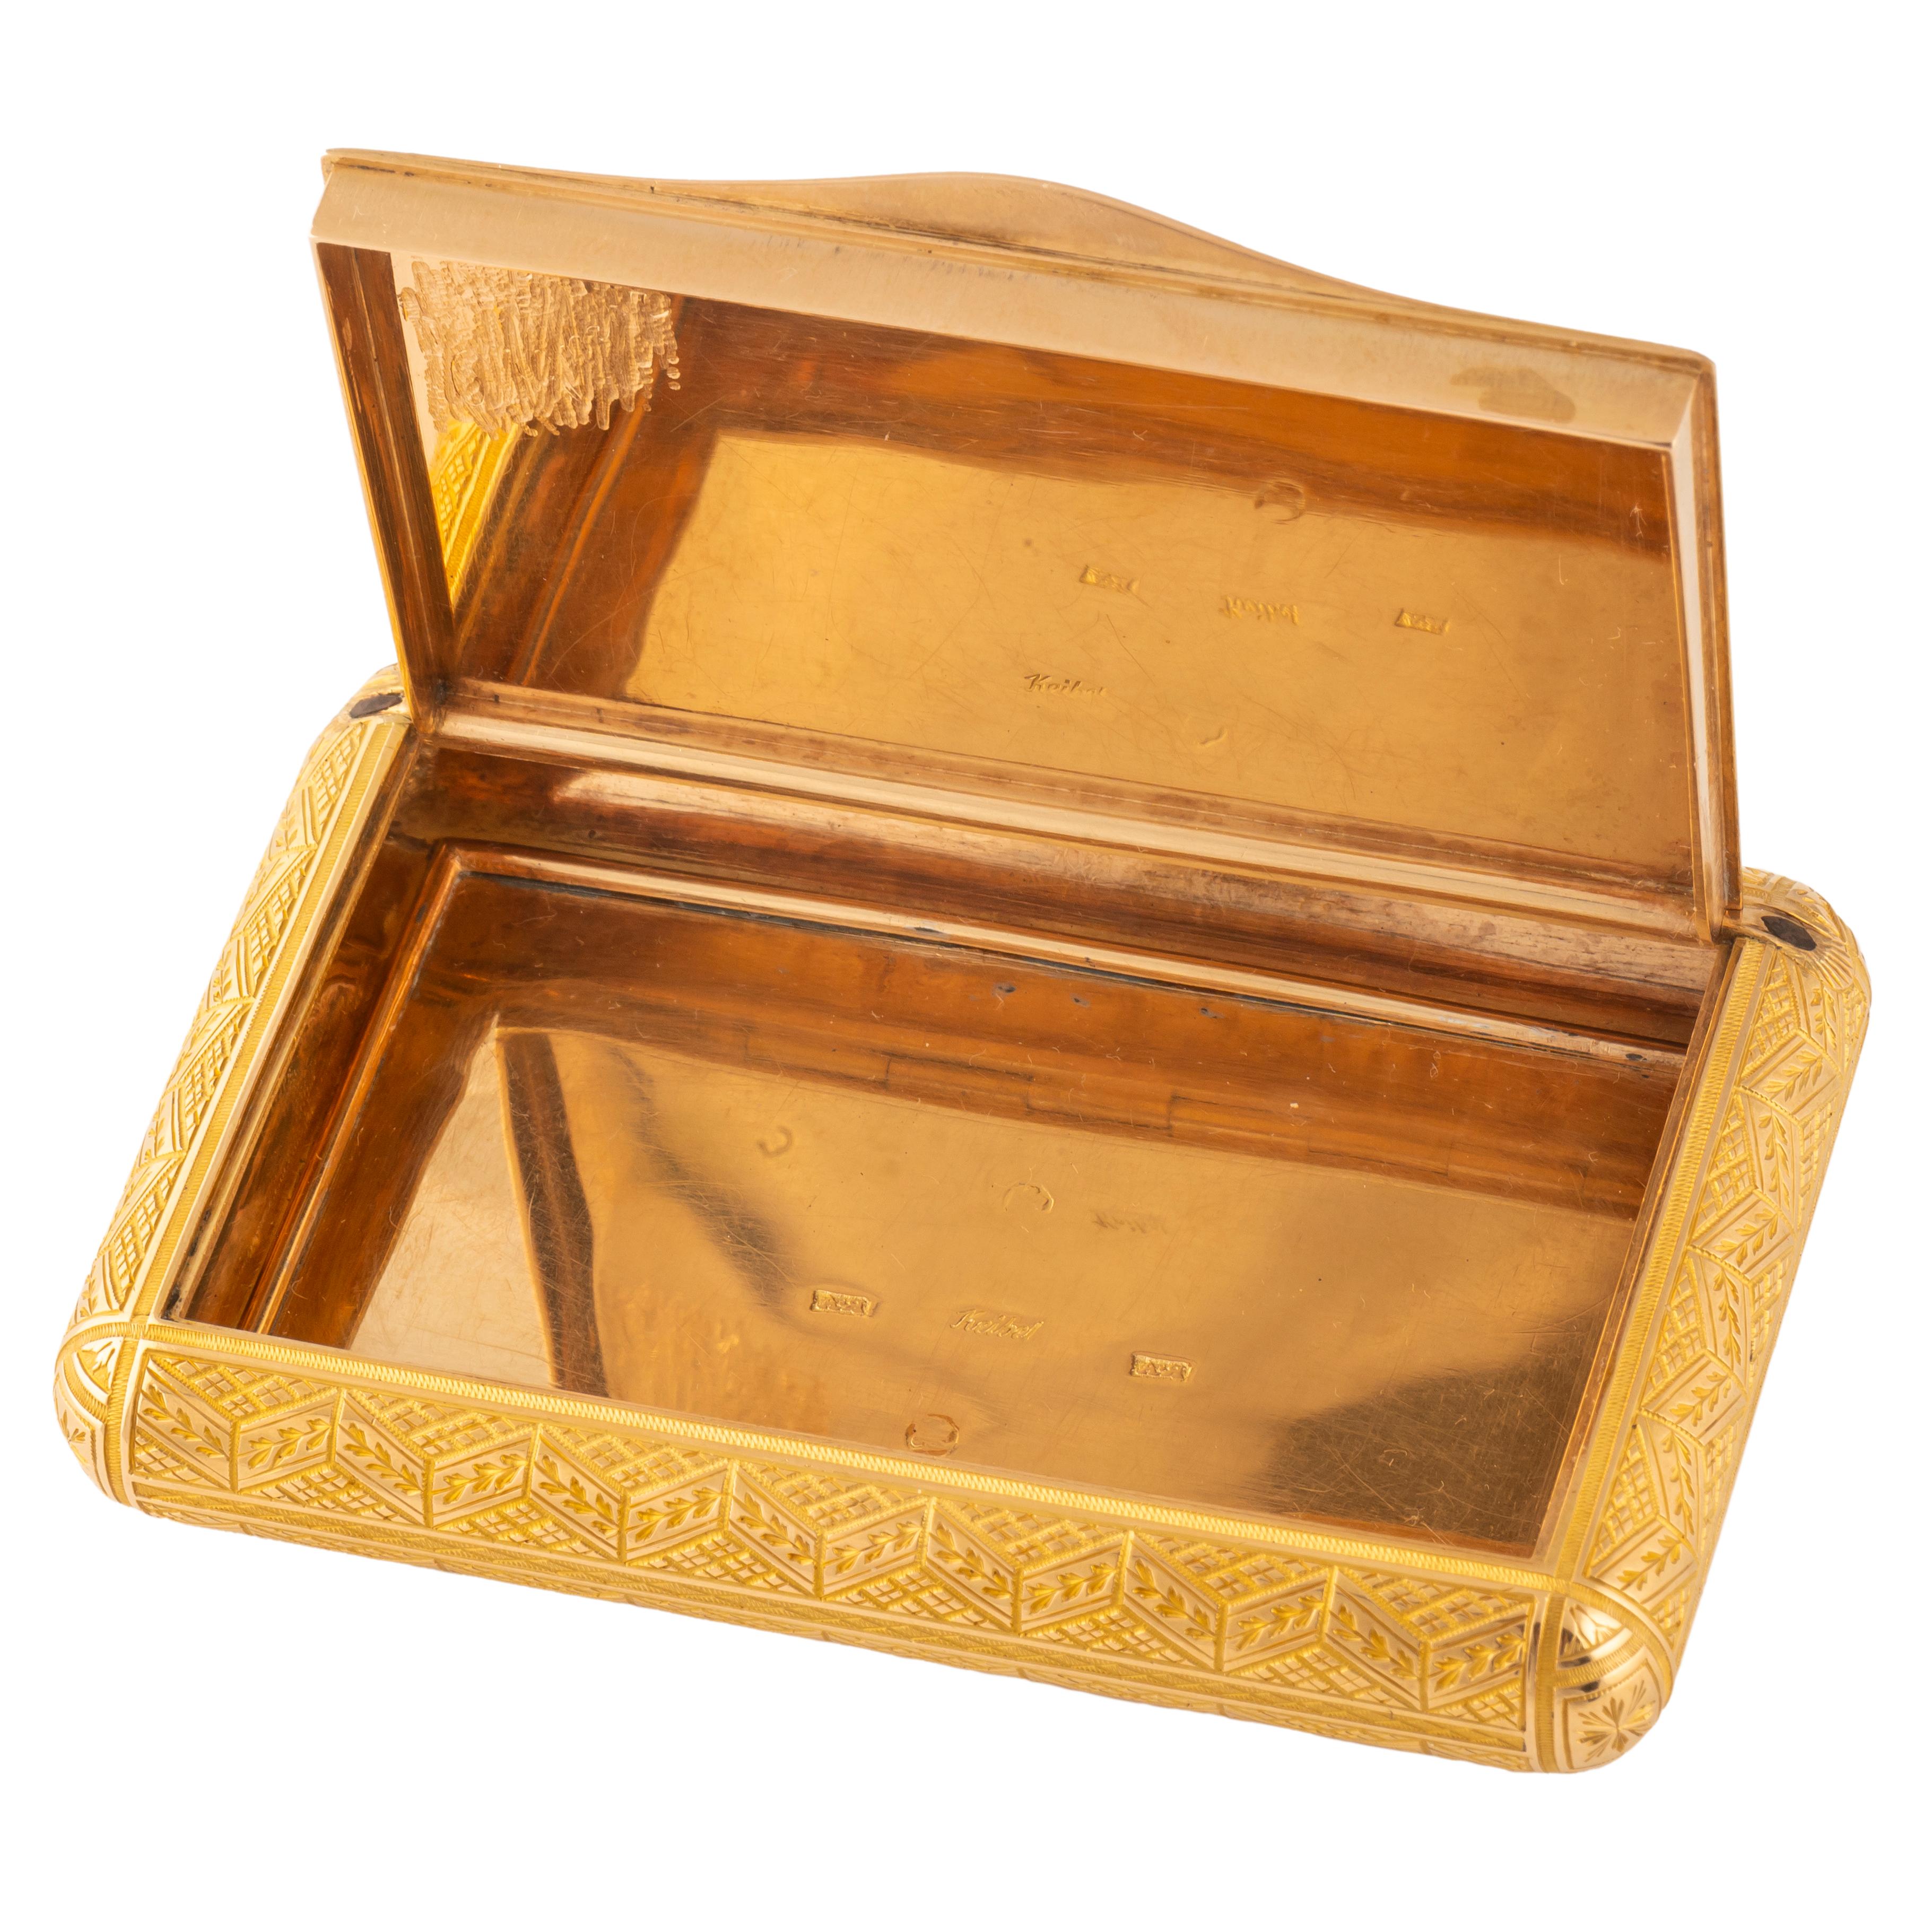 Women's or Men's Russian Imperial-era Gold Snuff Box by Keibel, St. Petersburg, circa 1820 For Sale